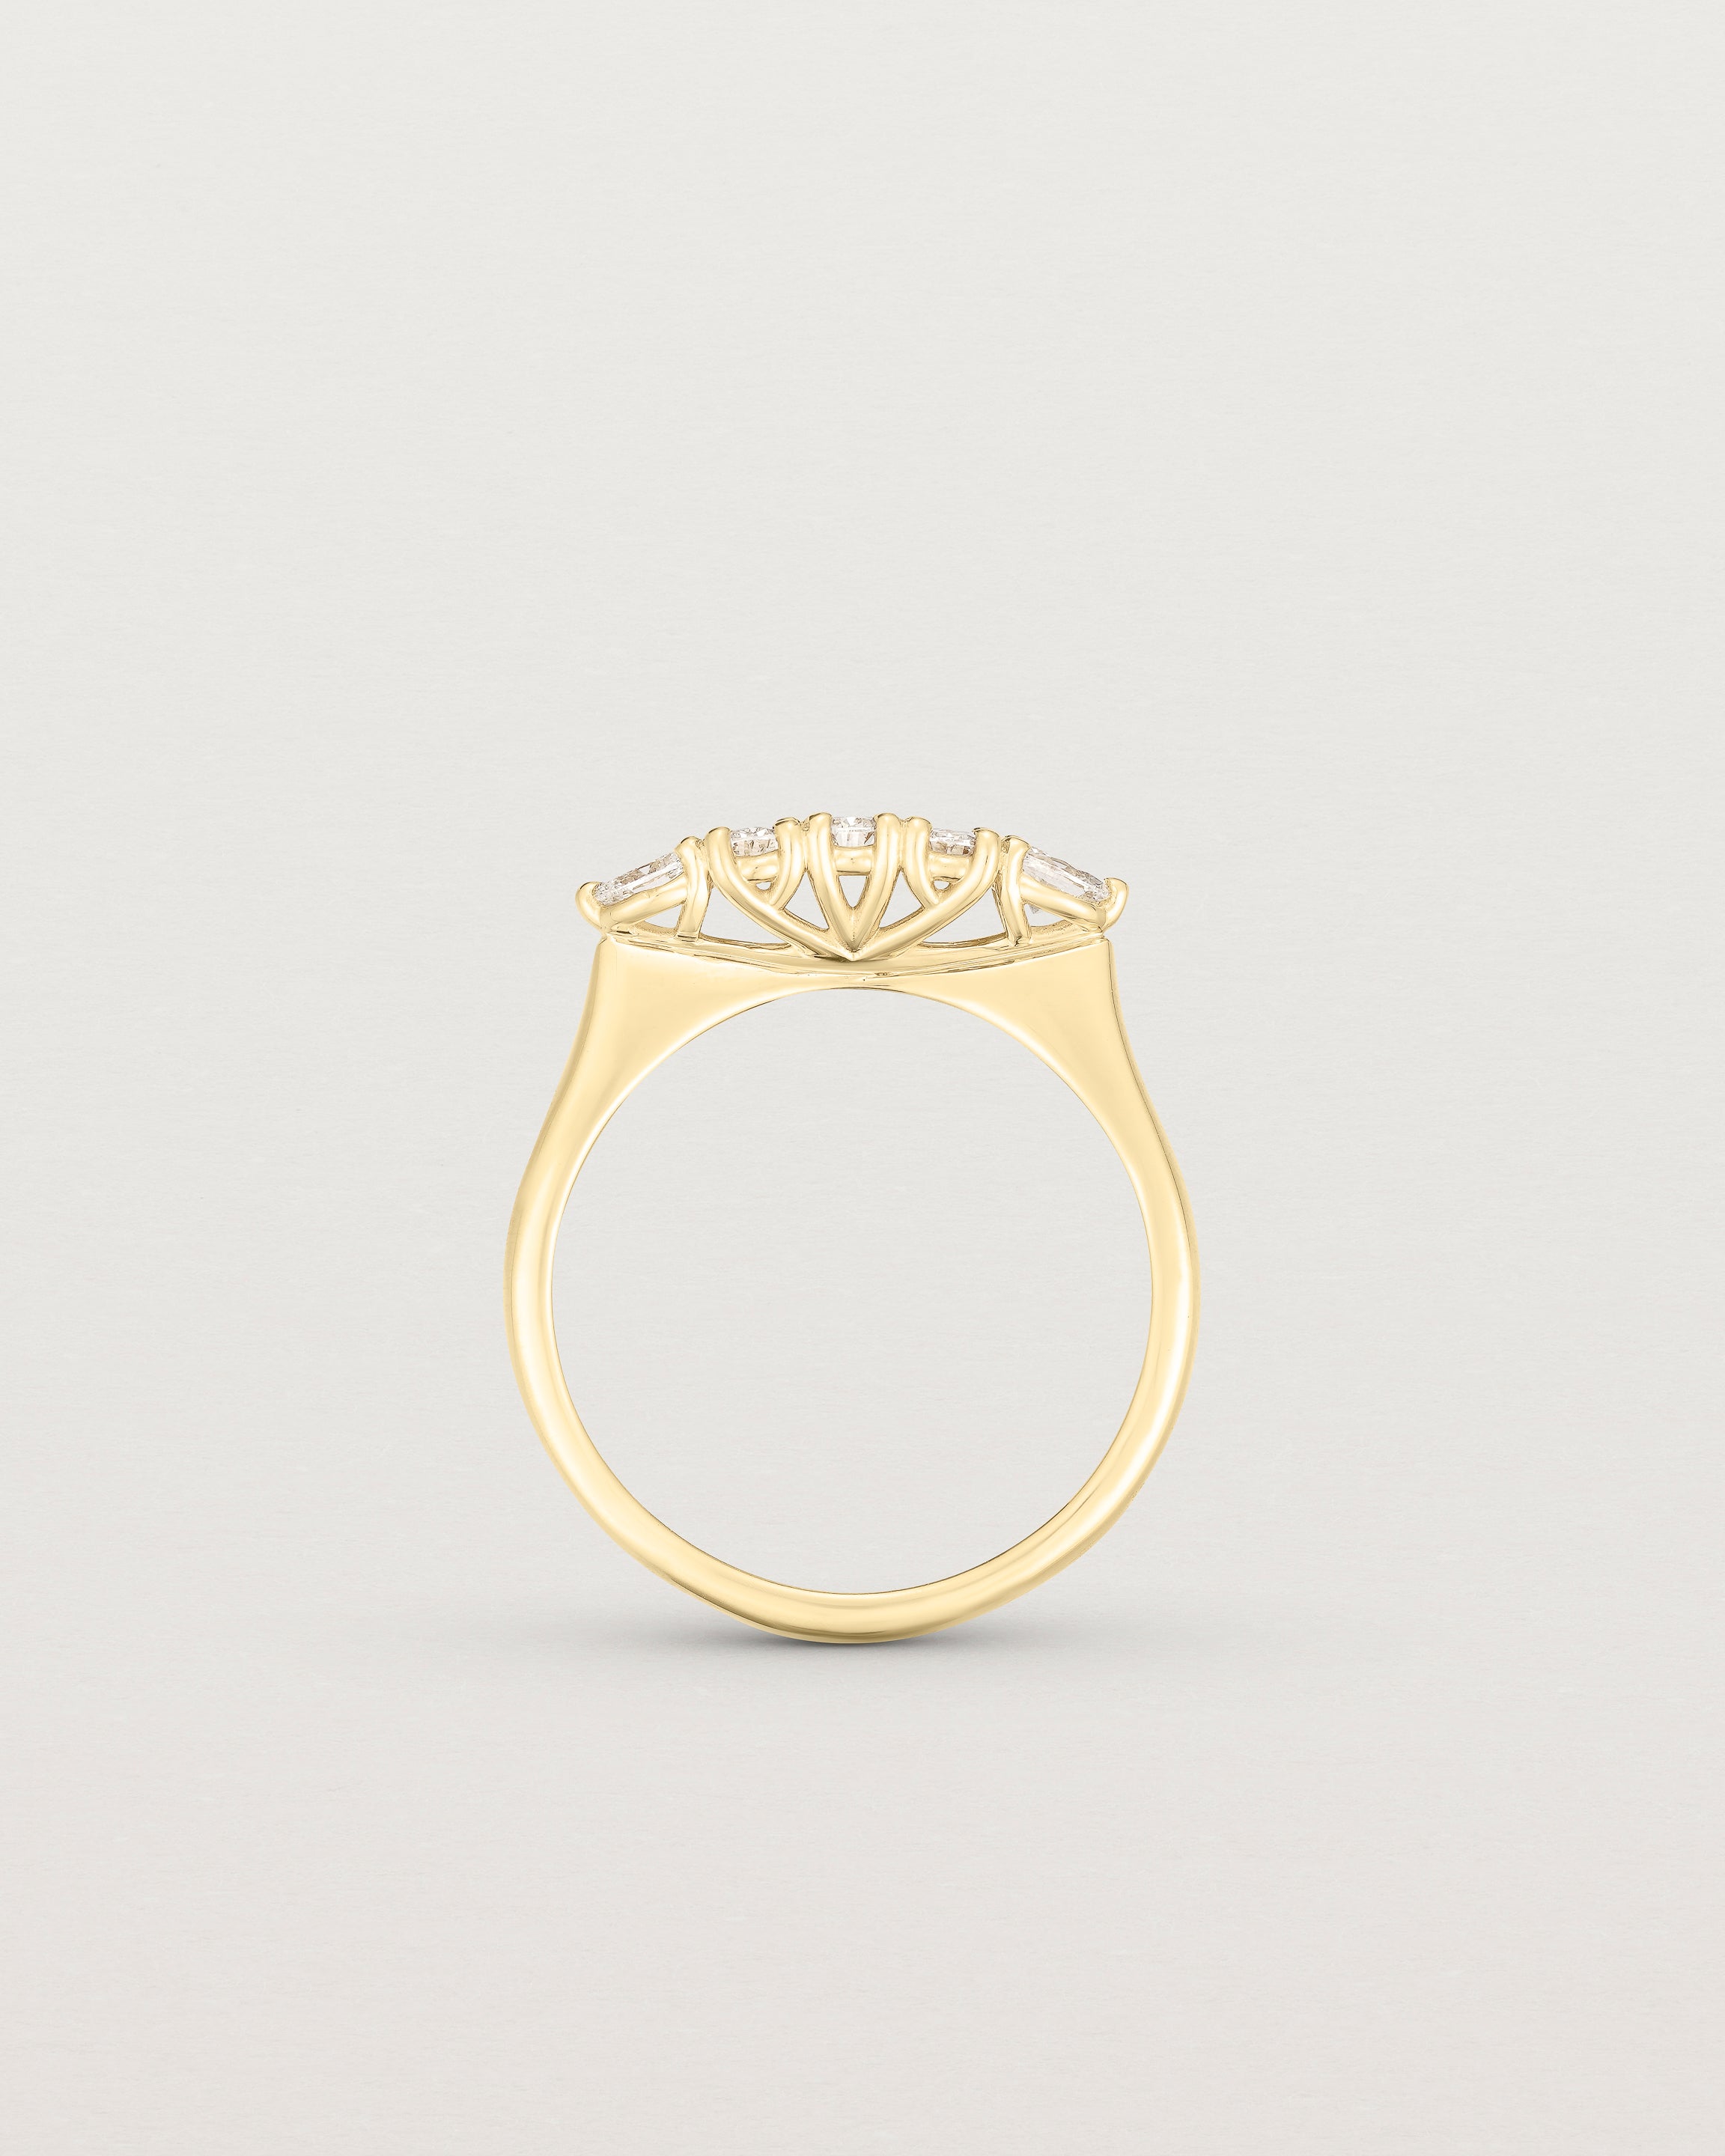 Standing image of diamond engagement ring in yellow gold. Featuring five white diamonds.